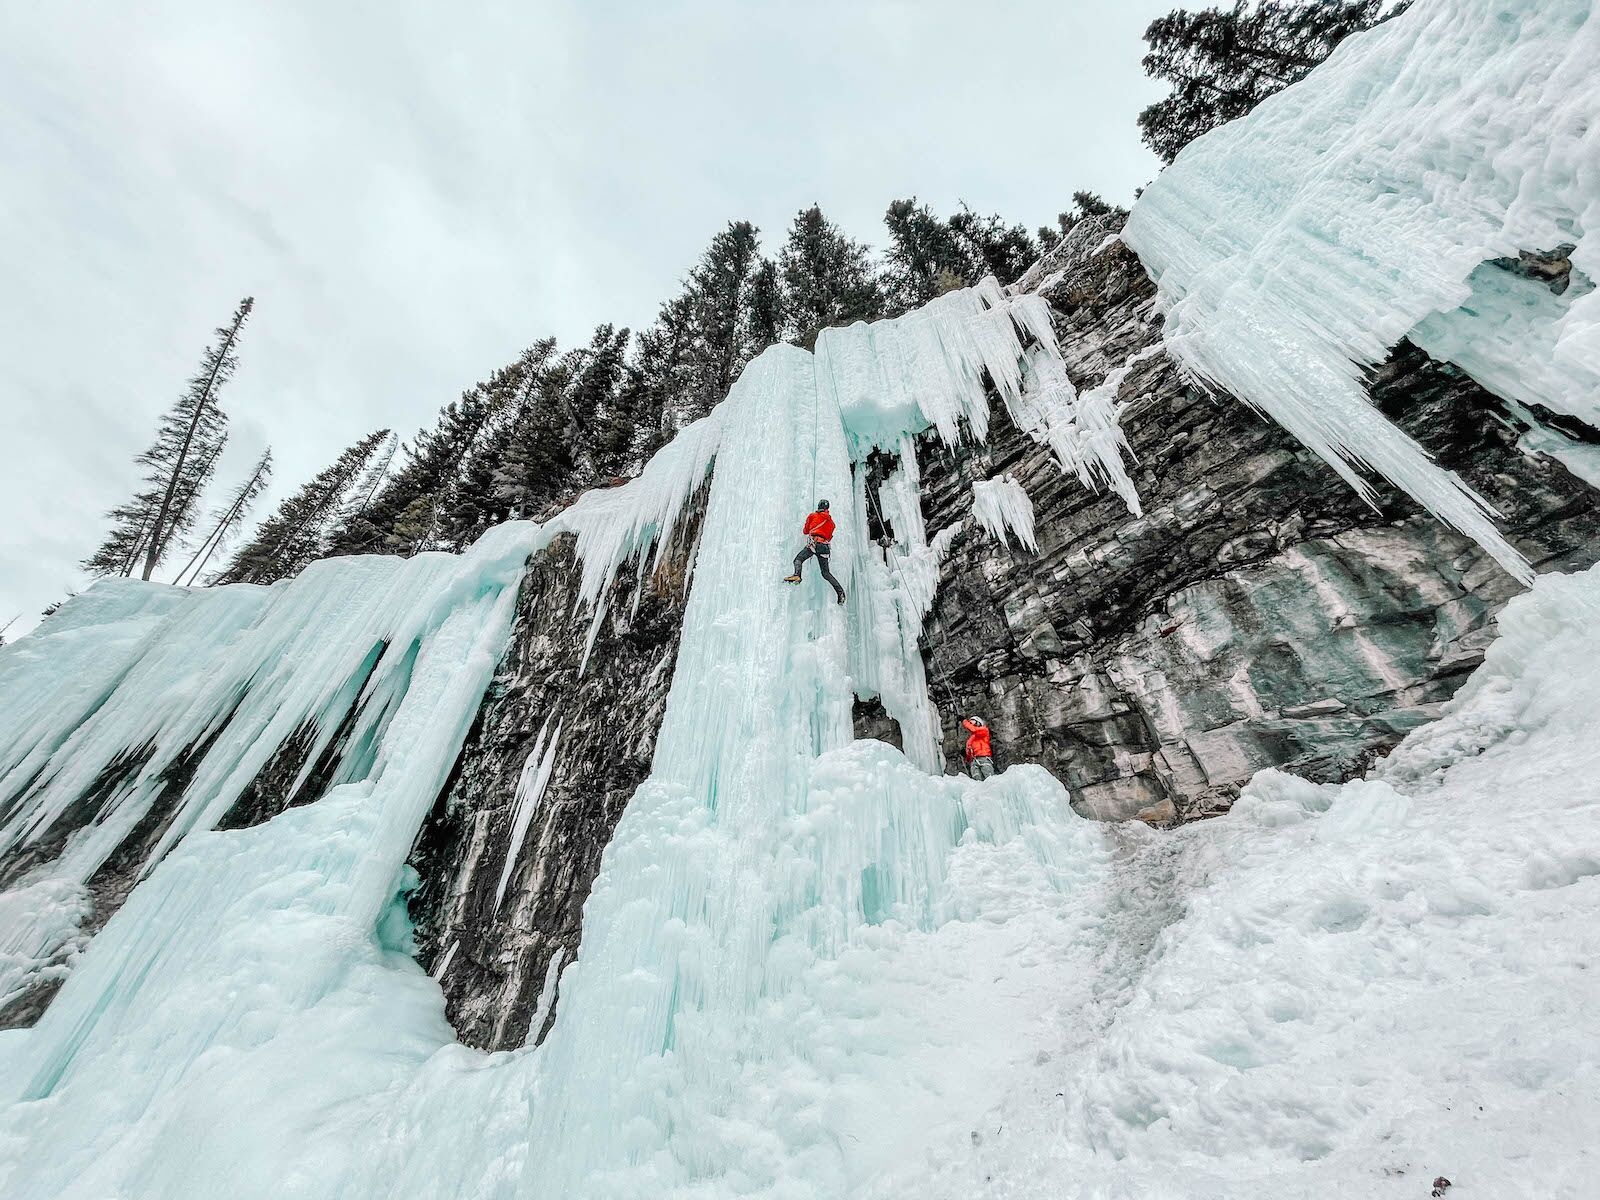 ice climbing on a banff weekend focused on wellness. Person in red jacket on ice column